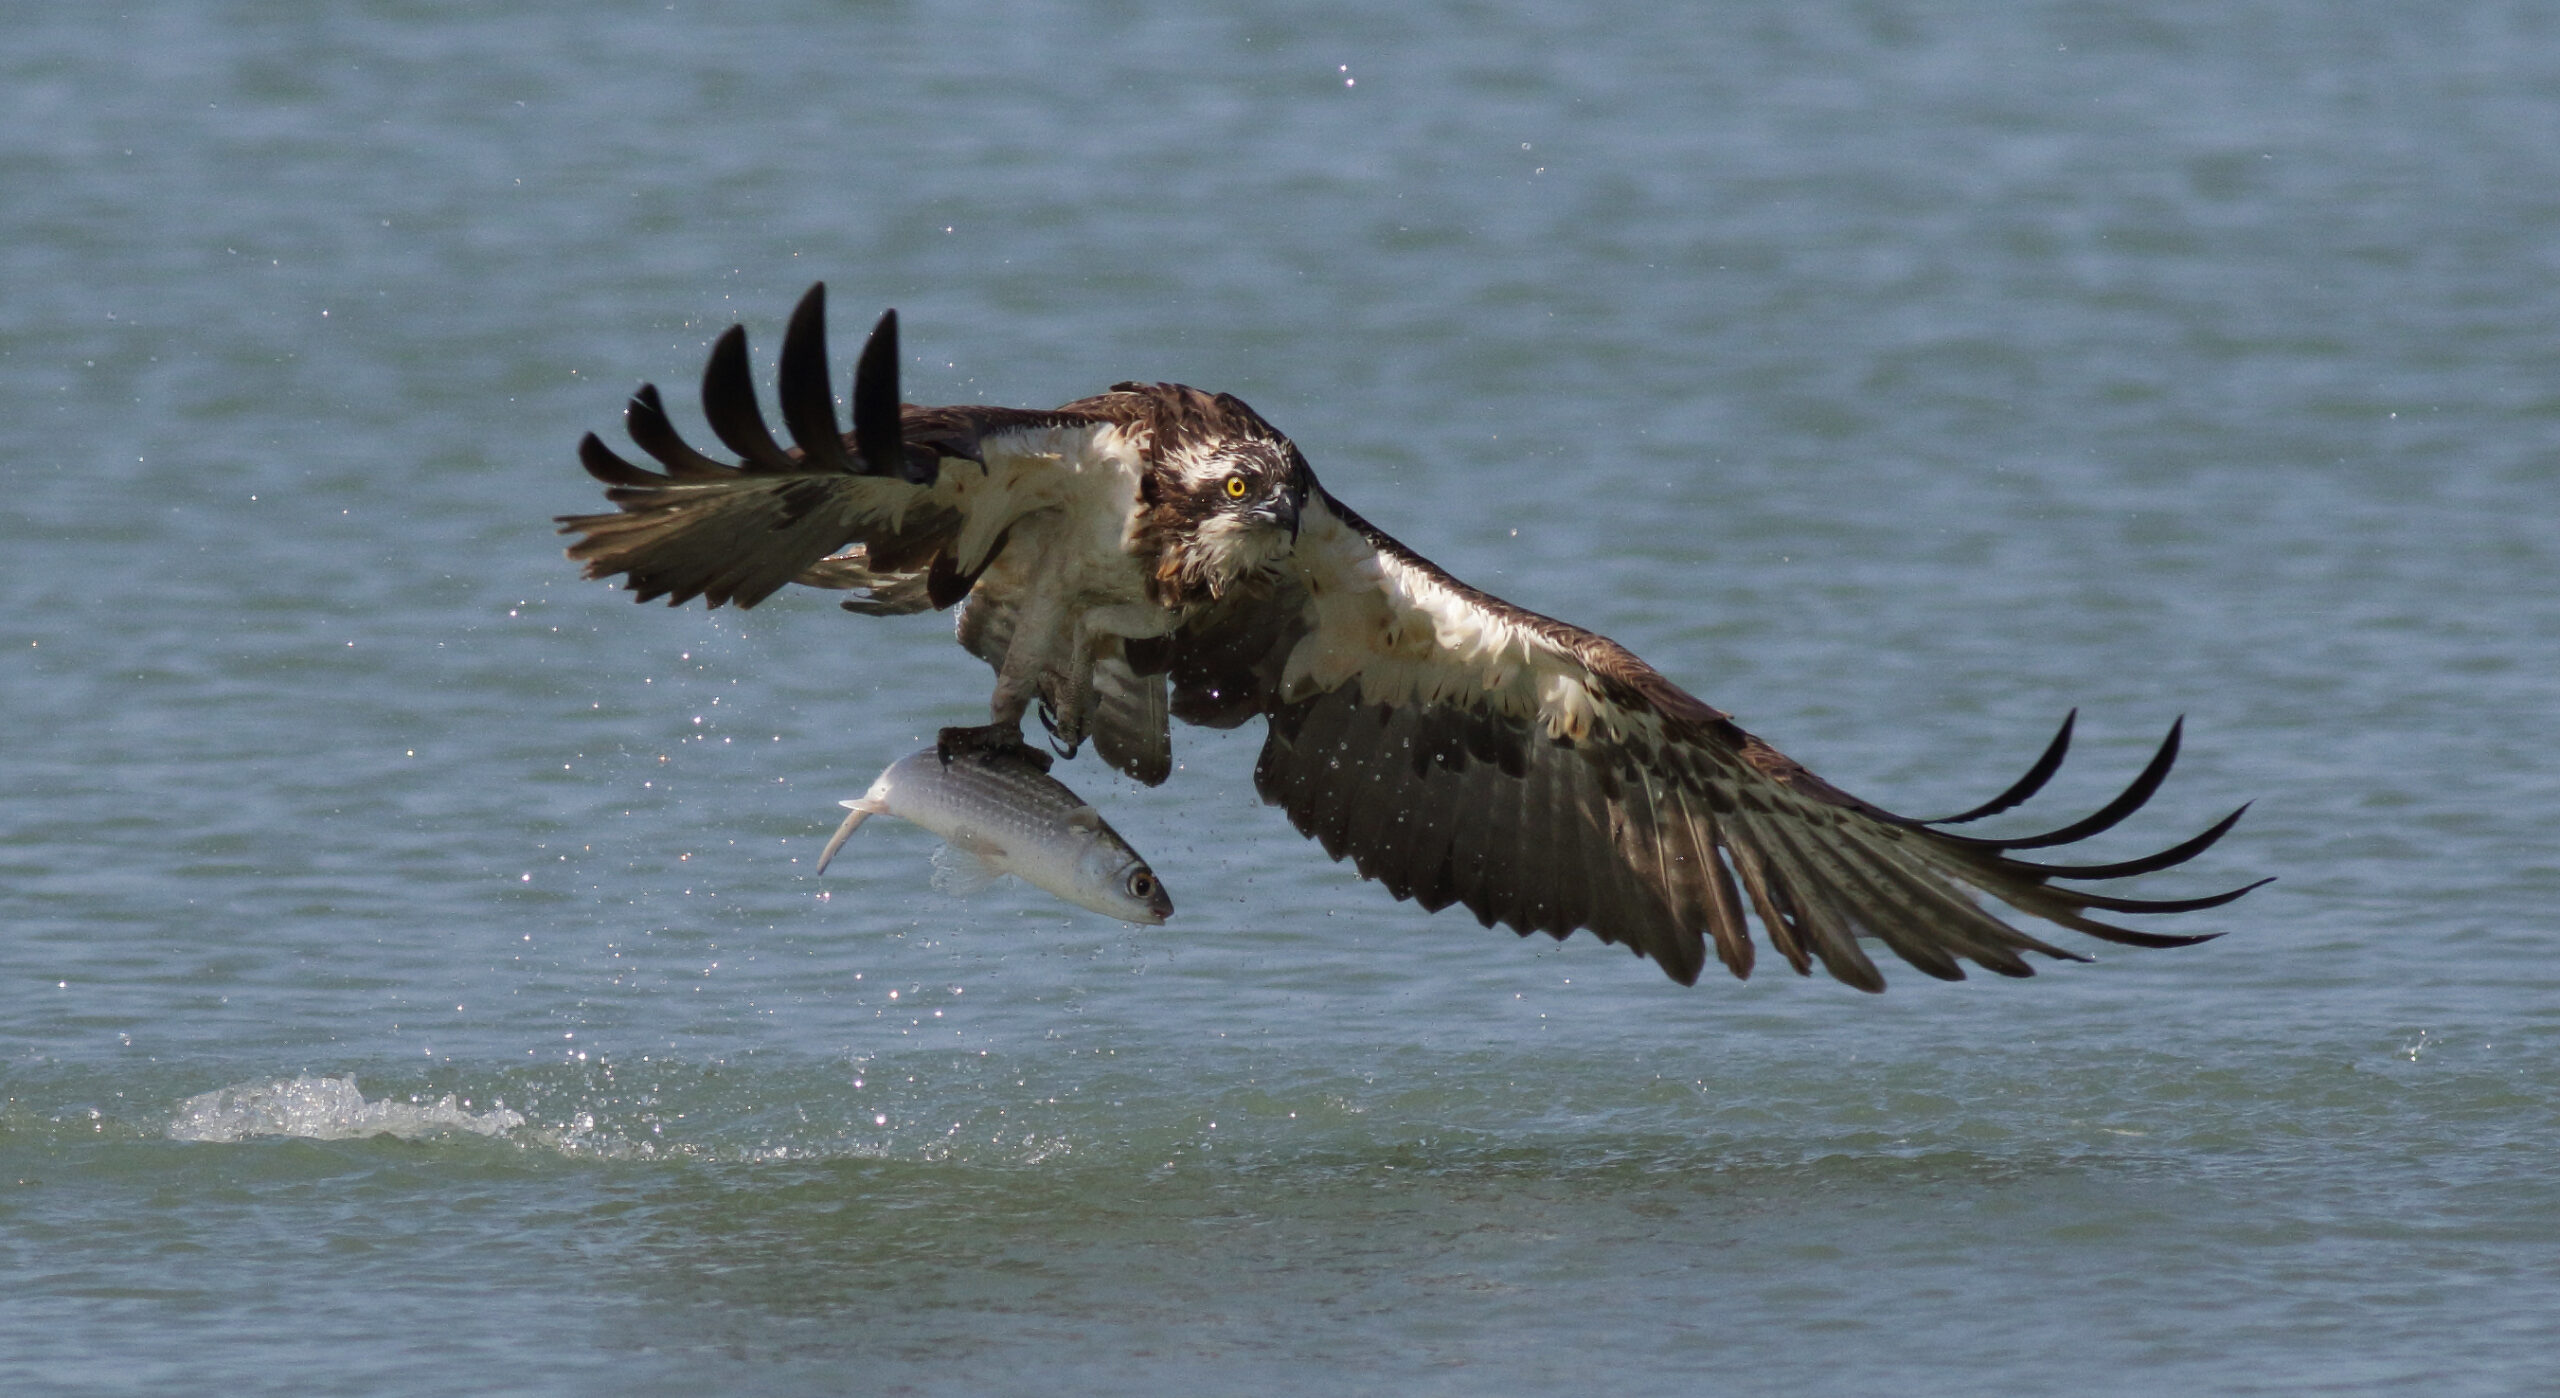 Osprey catching a fish in the sea.